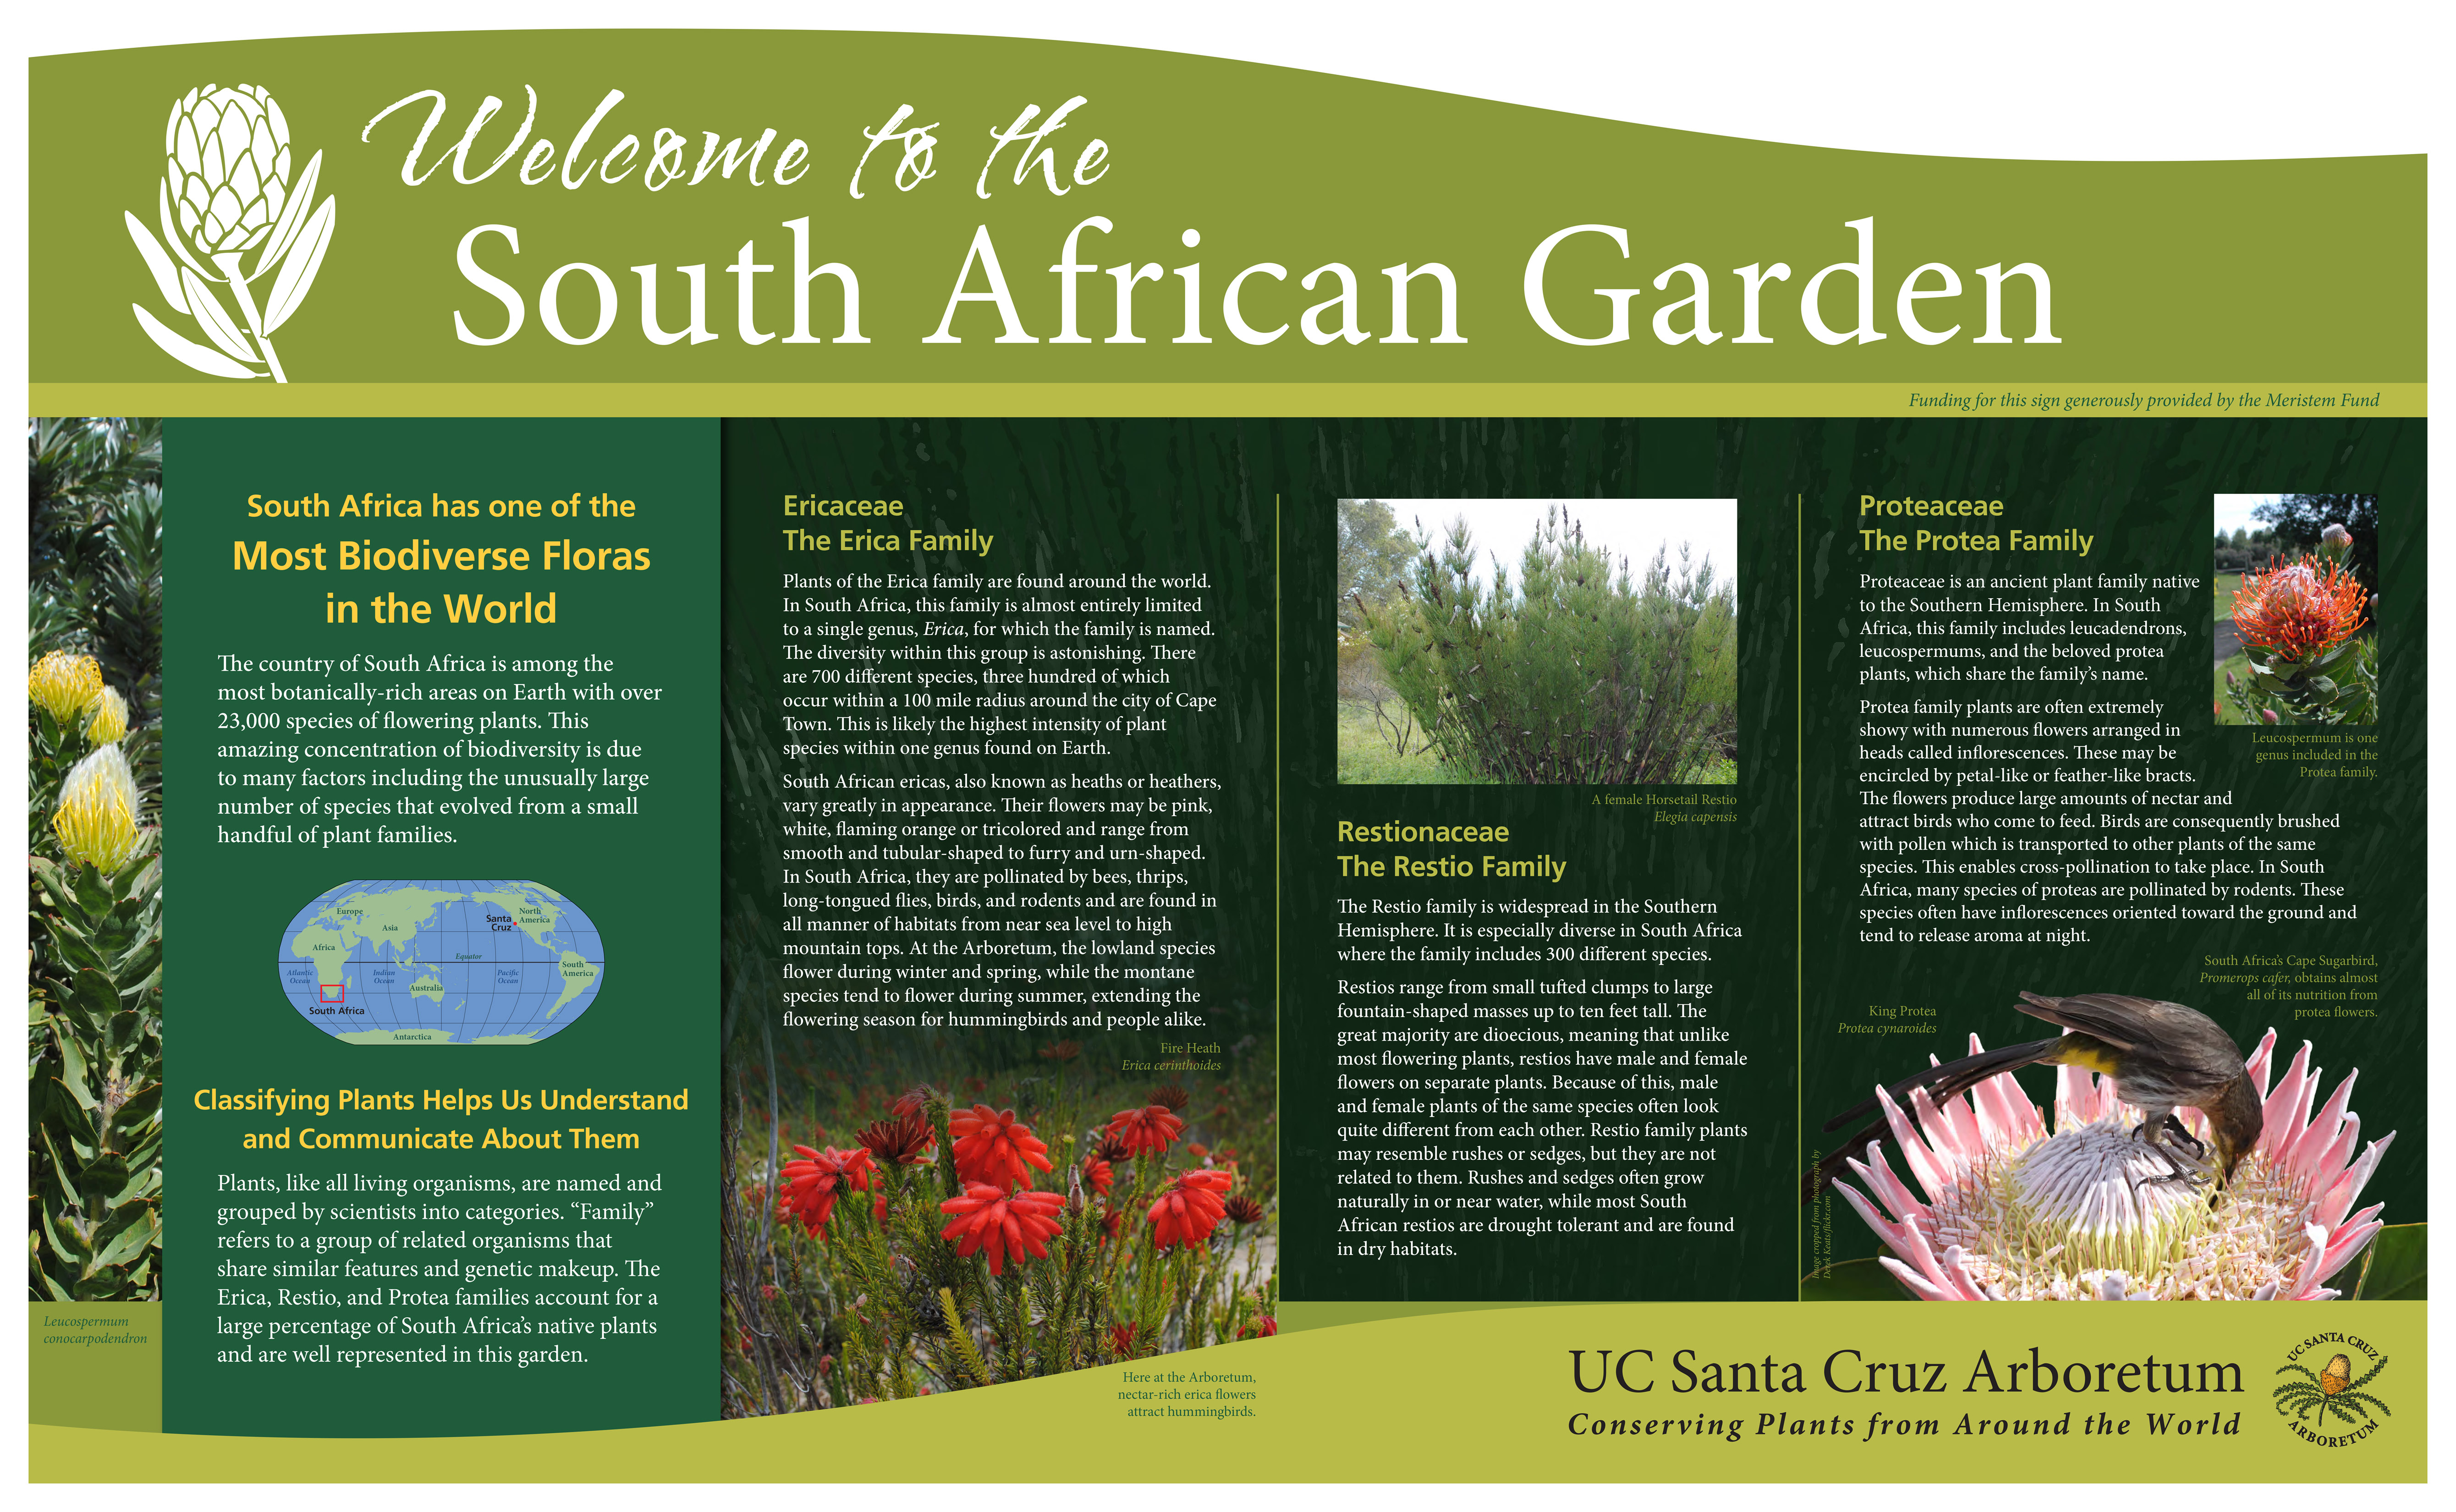 5-ucsc-arboretum_south-africa-sign_second-on-path.jpg